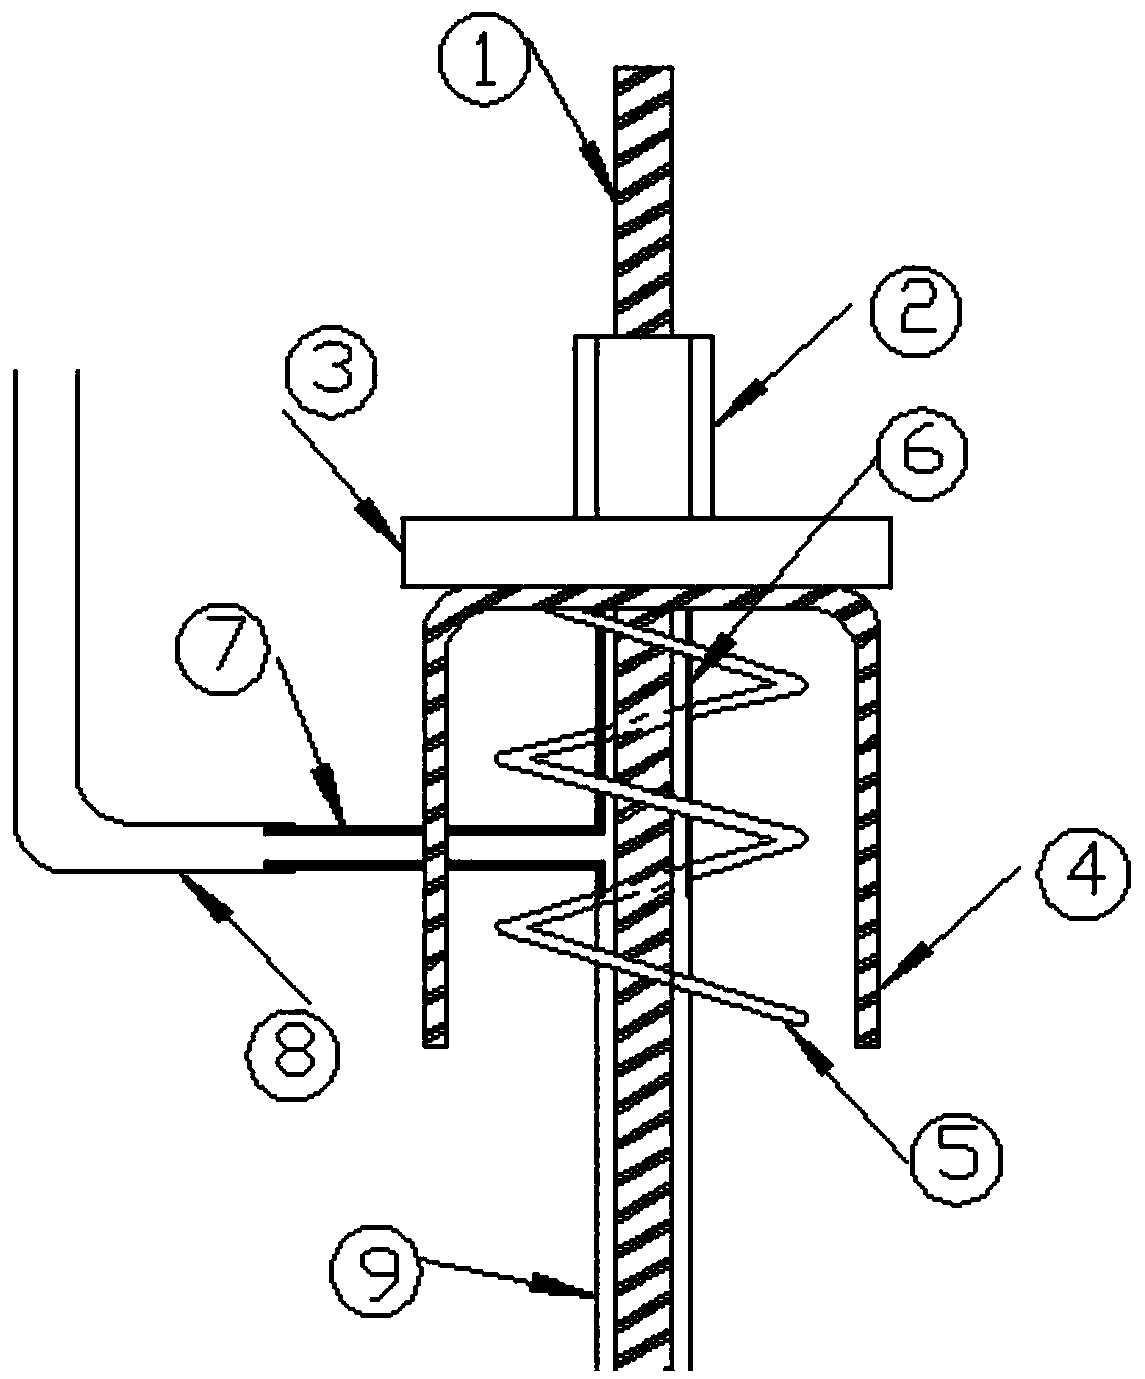 Post-tensioning method prestressed grouting stock outlet structure